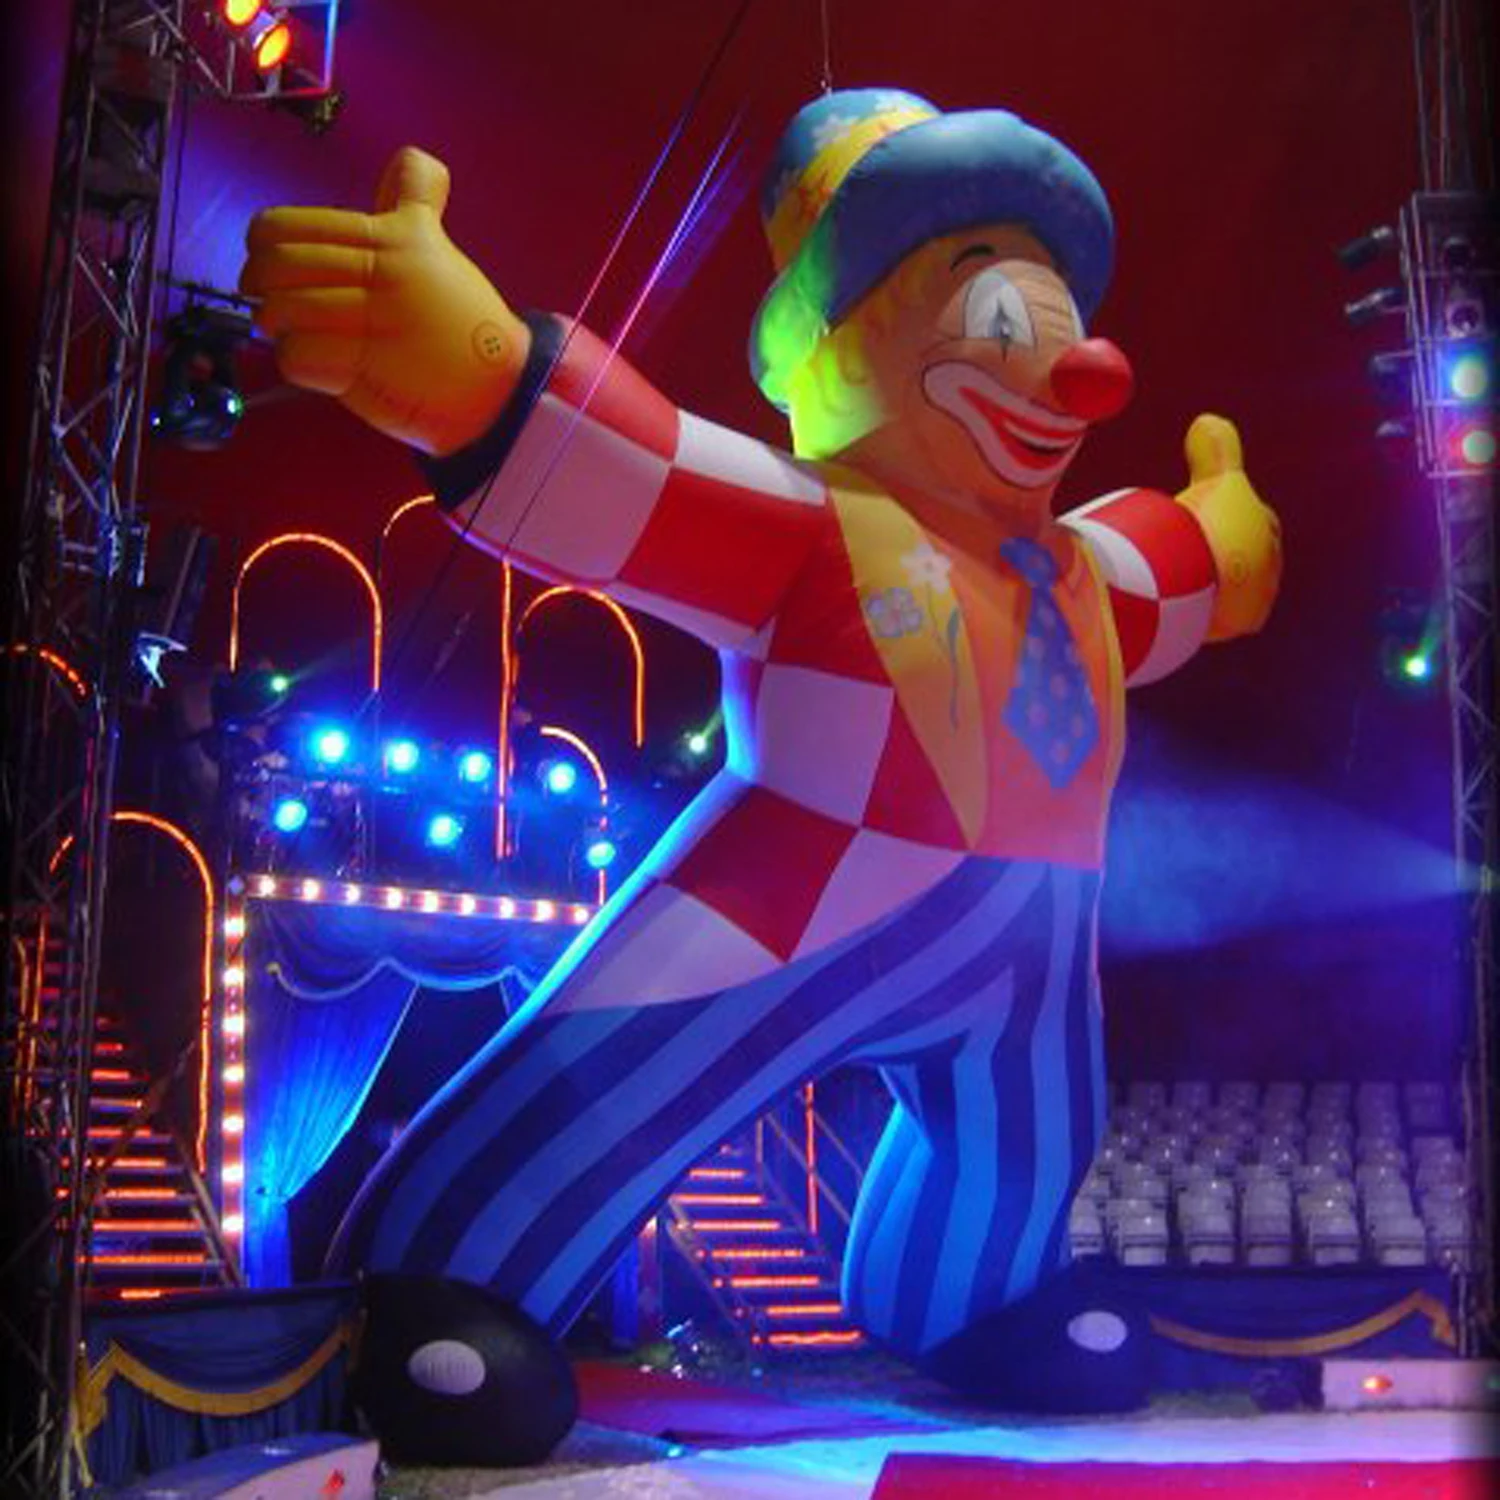 

Giant Inflatable Clown Cartoon Model With Blower Air Blow Ups Toys For Outdoor Stage Events Decoration Advertising